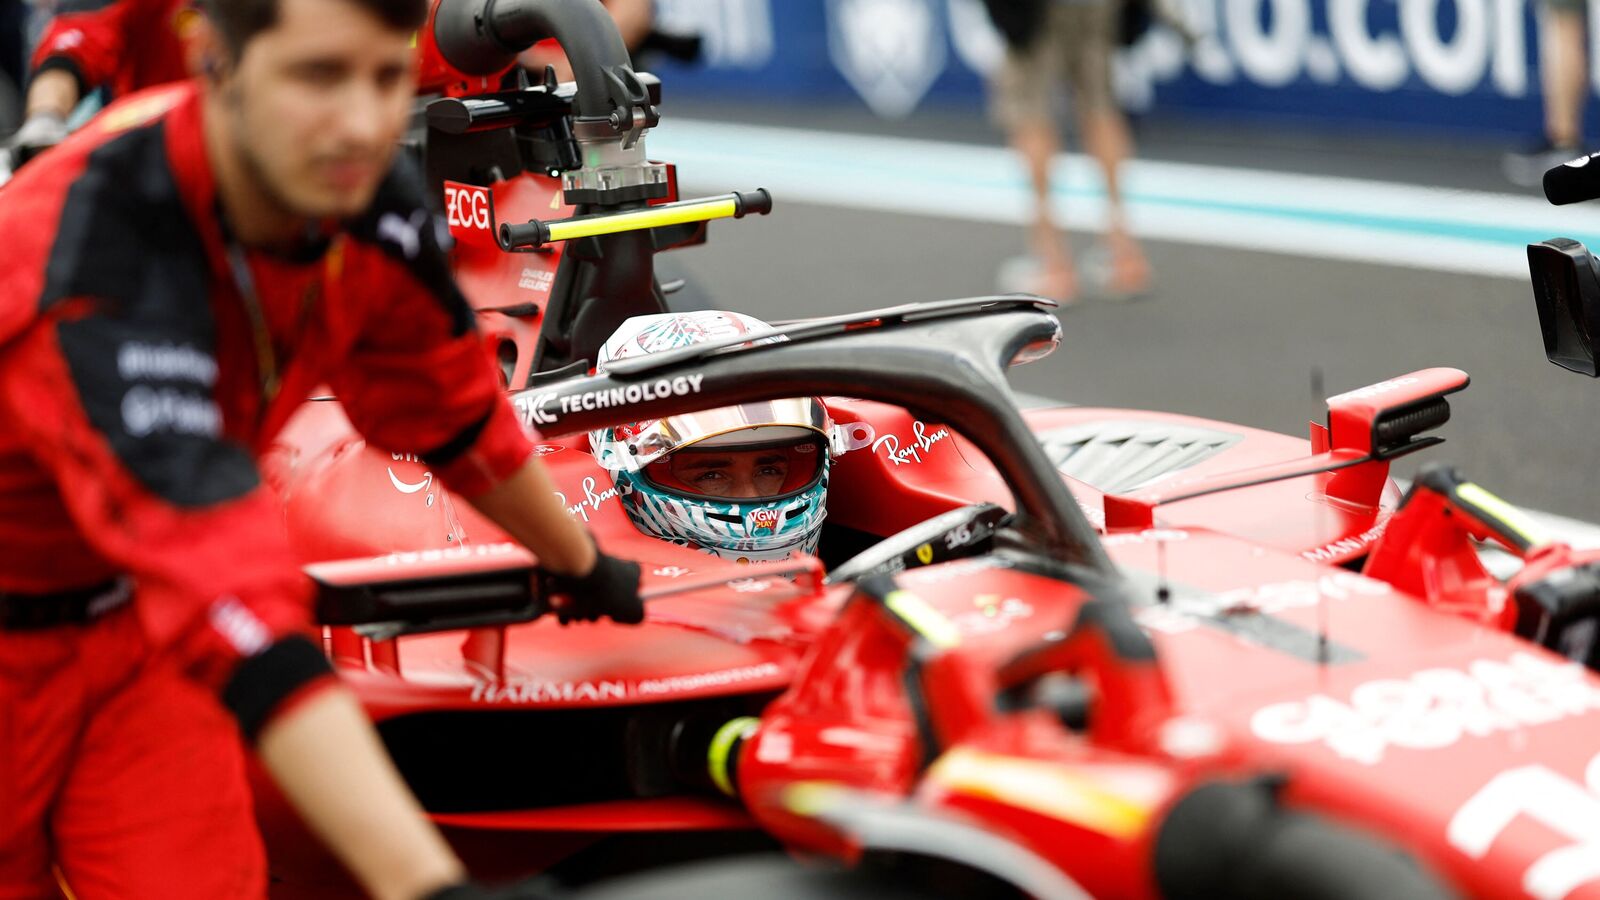 The knocks keep coming at Ferrari but Charles Leclerc is learning fast, Formula One 2019